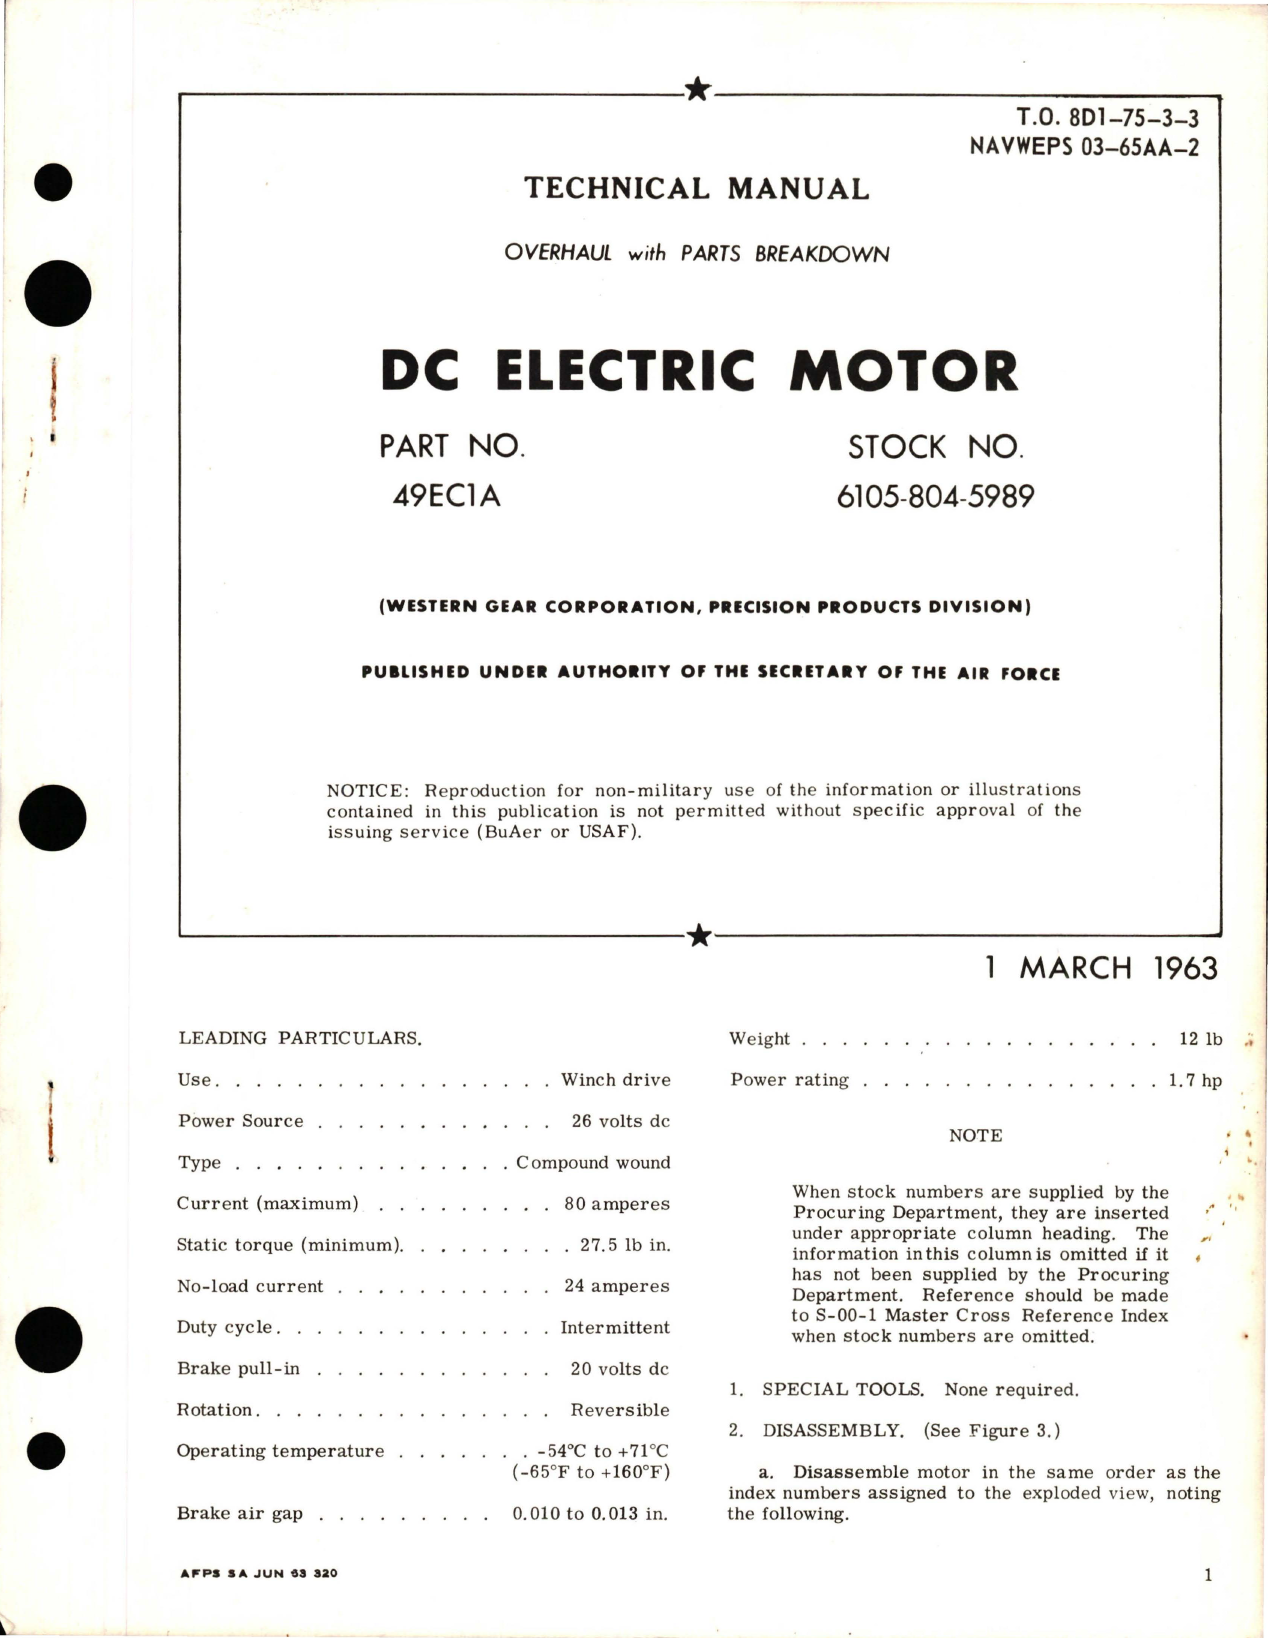 Sample page 1 from AirCorps Library document: Overhaul with Parts Breakdown for DC Electric Motor - Part 49EC1A